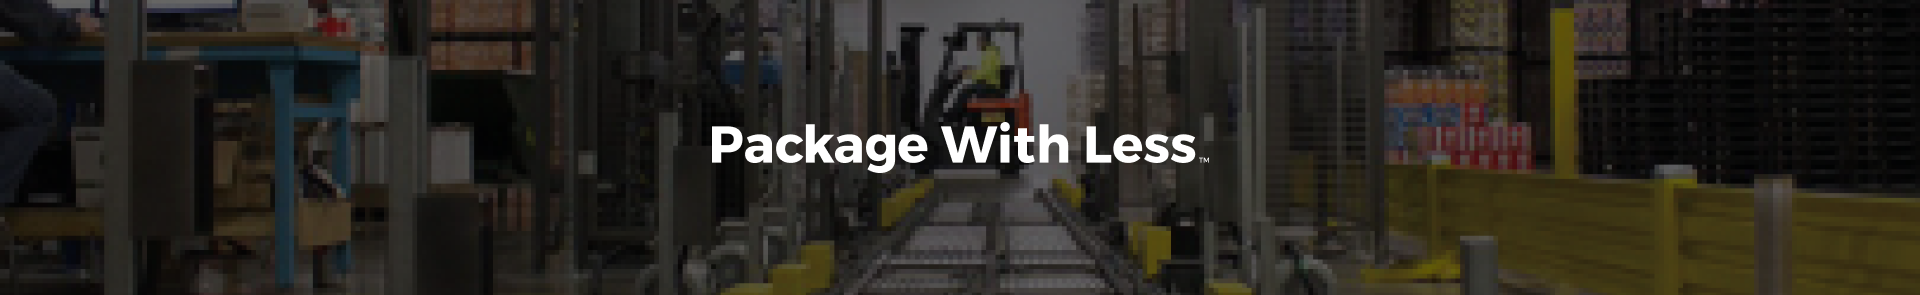 Warehouse Aisle with Forklift